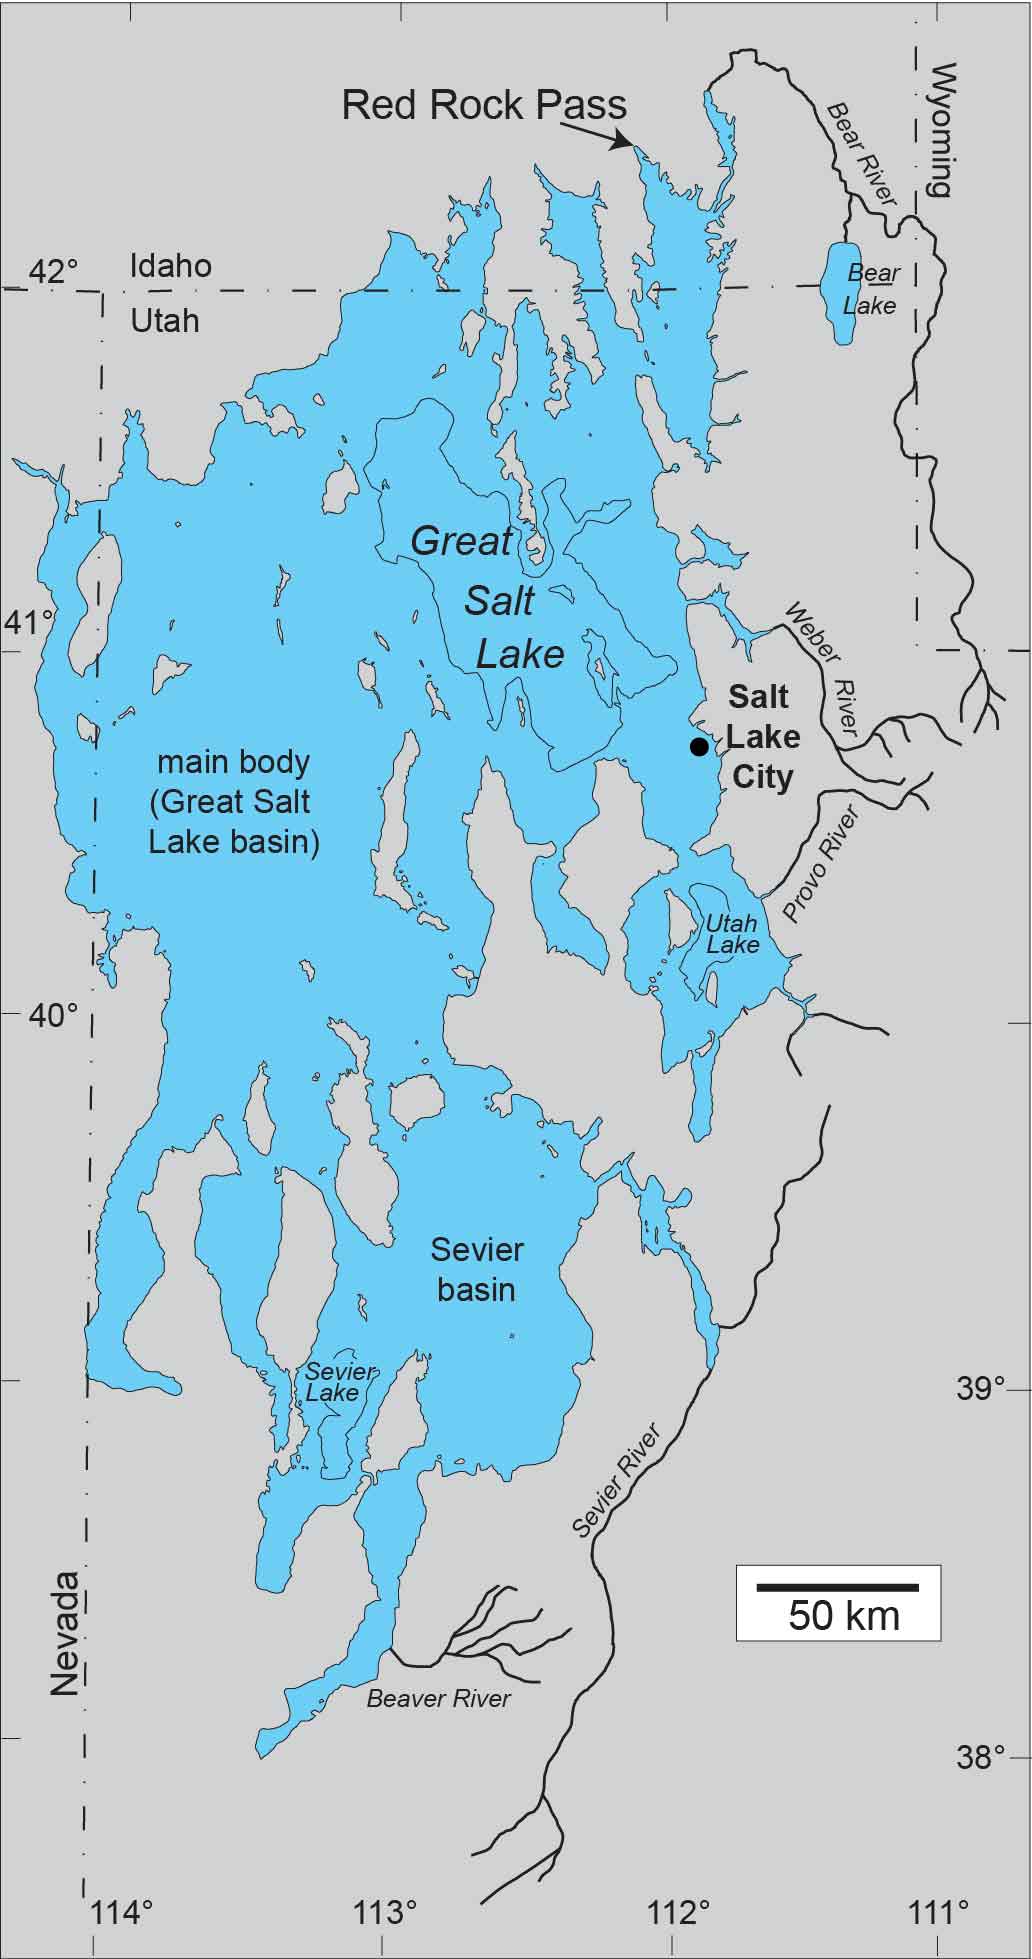 Simplified map of the Great Salt Lake